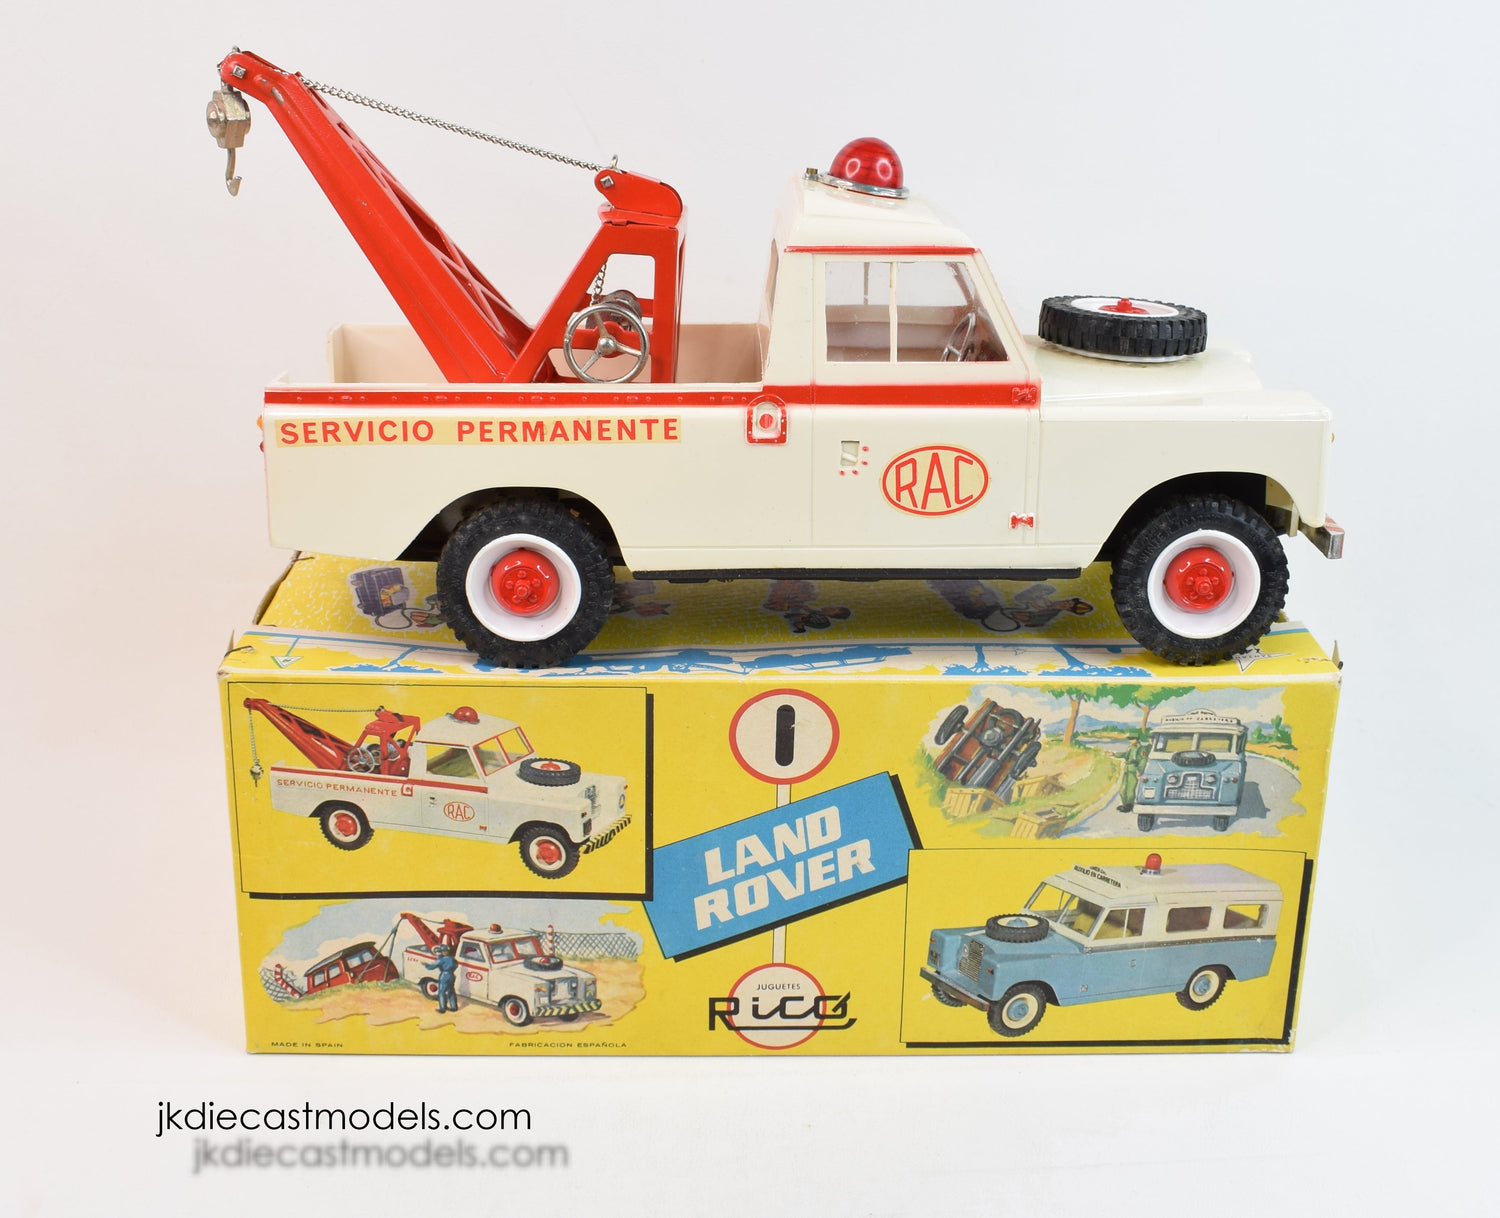 Rico RAC Land Rover Mint/Lovely box 'Monaco' Collection